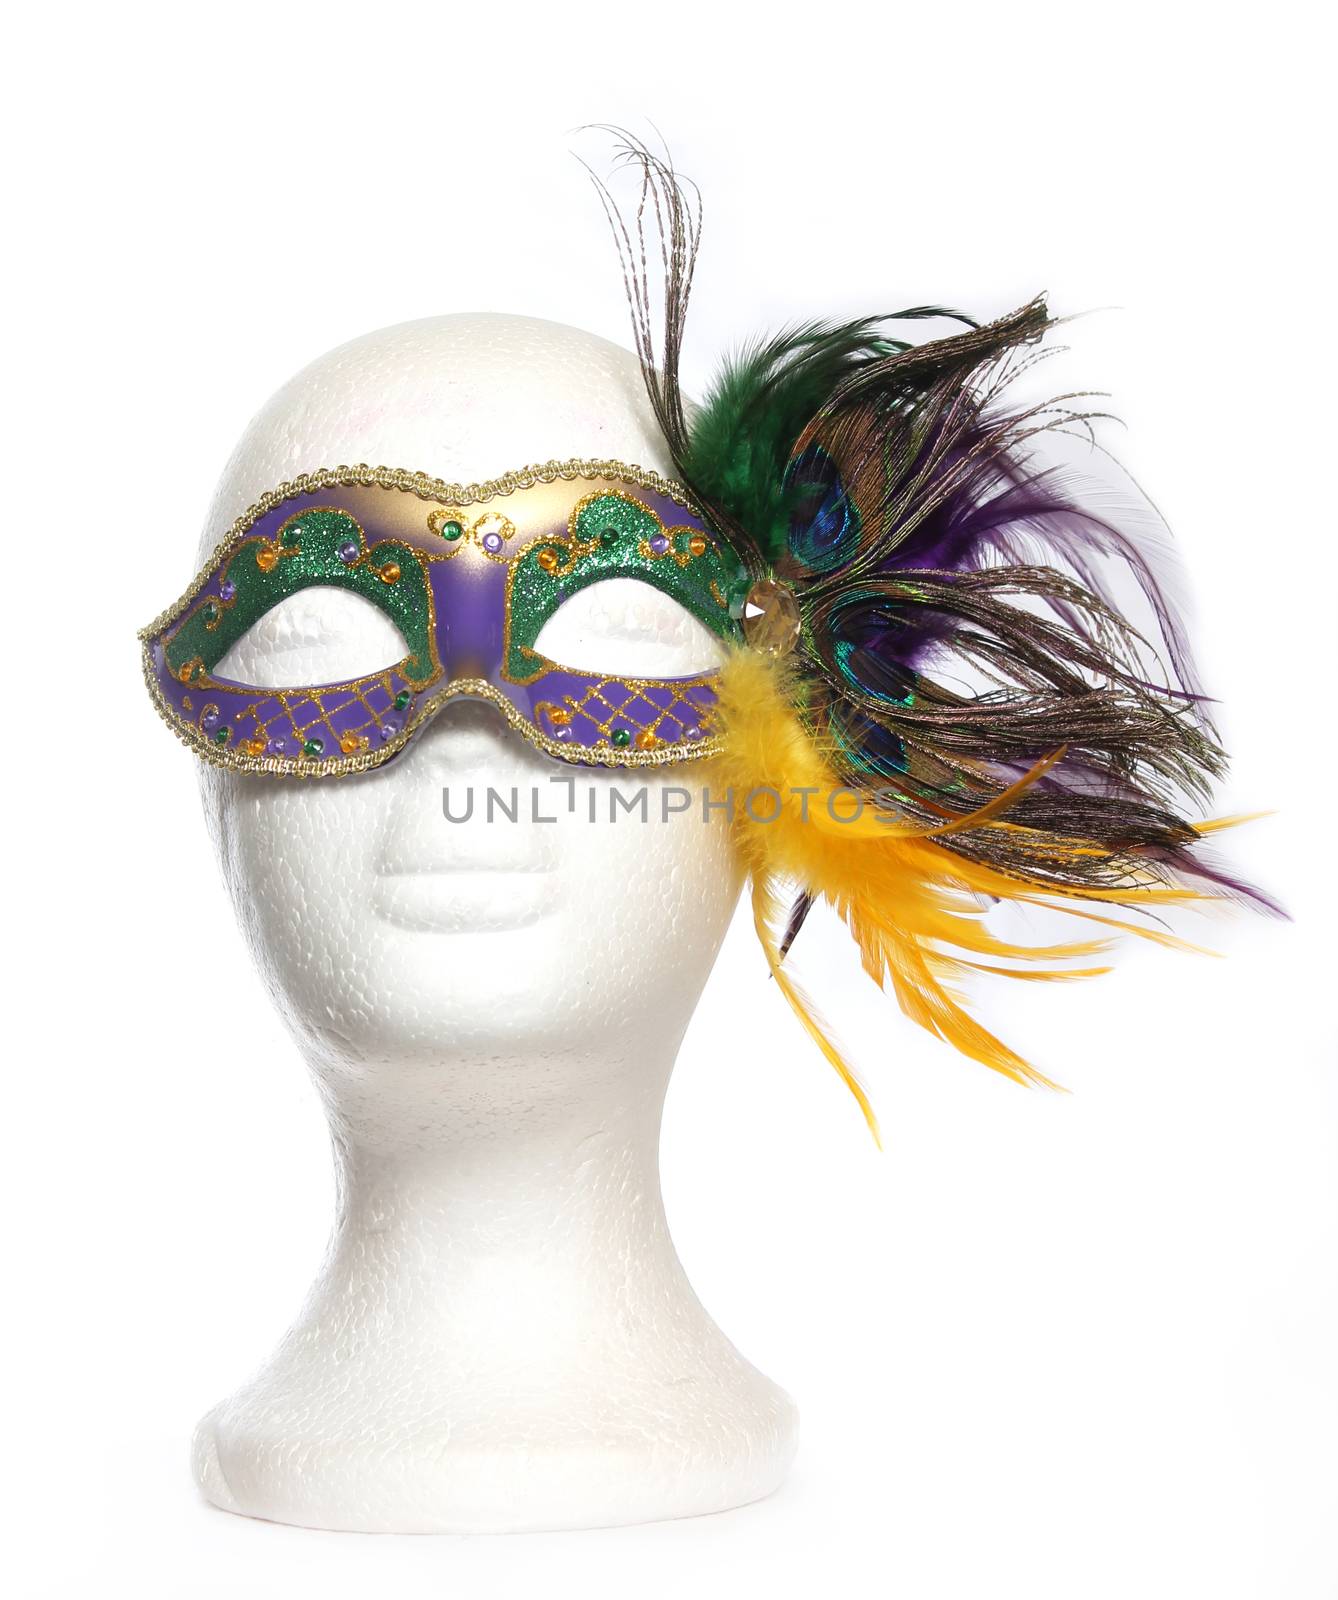 Carnival Mask With Feathers on Mannequin Head